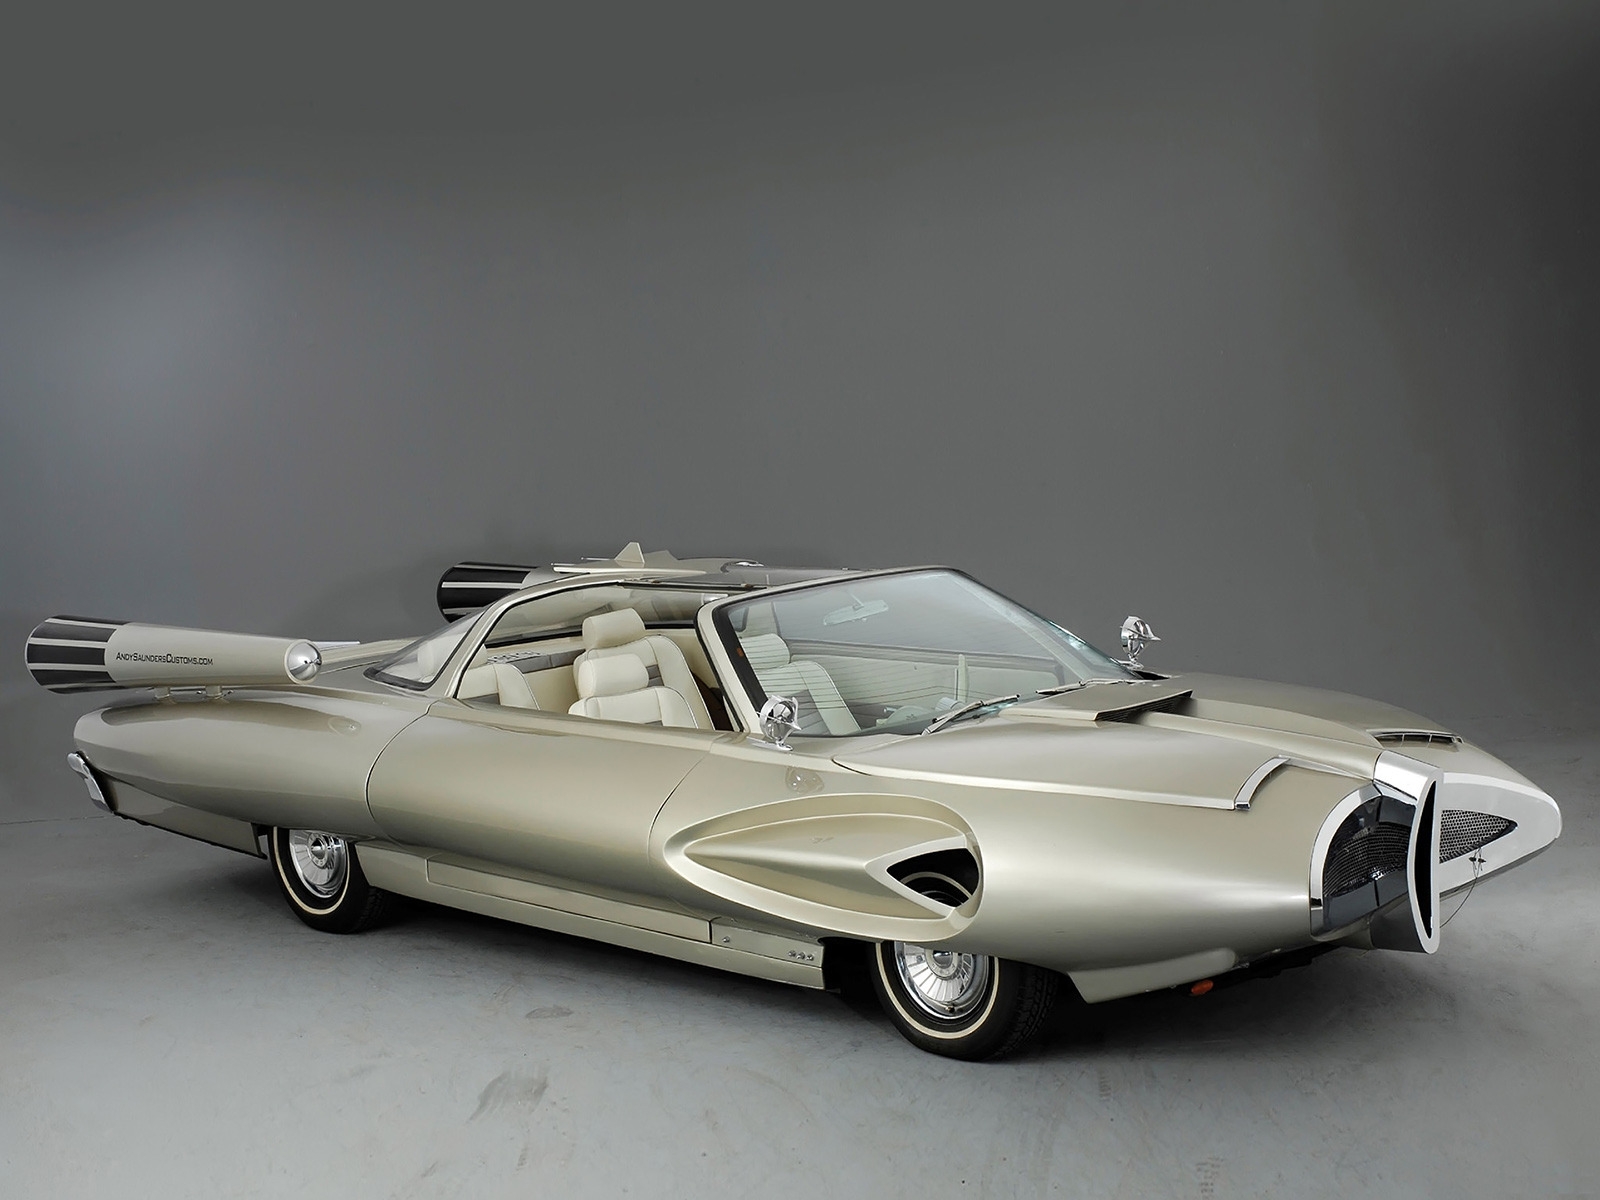 Ford X 2000 Concept Car 1958 for 1600 x 1200 resolution